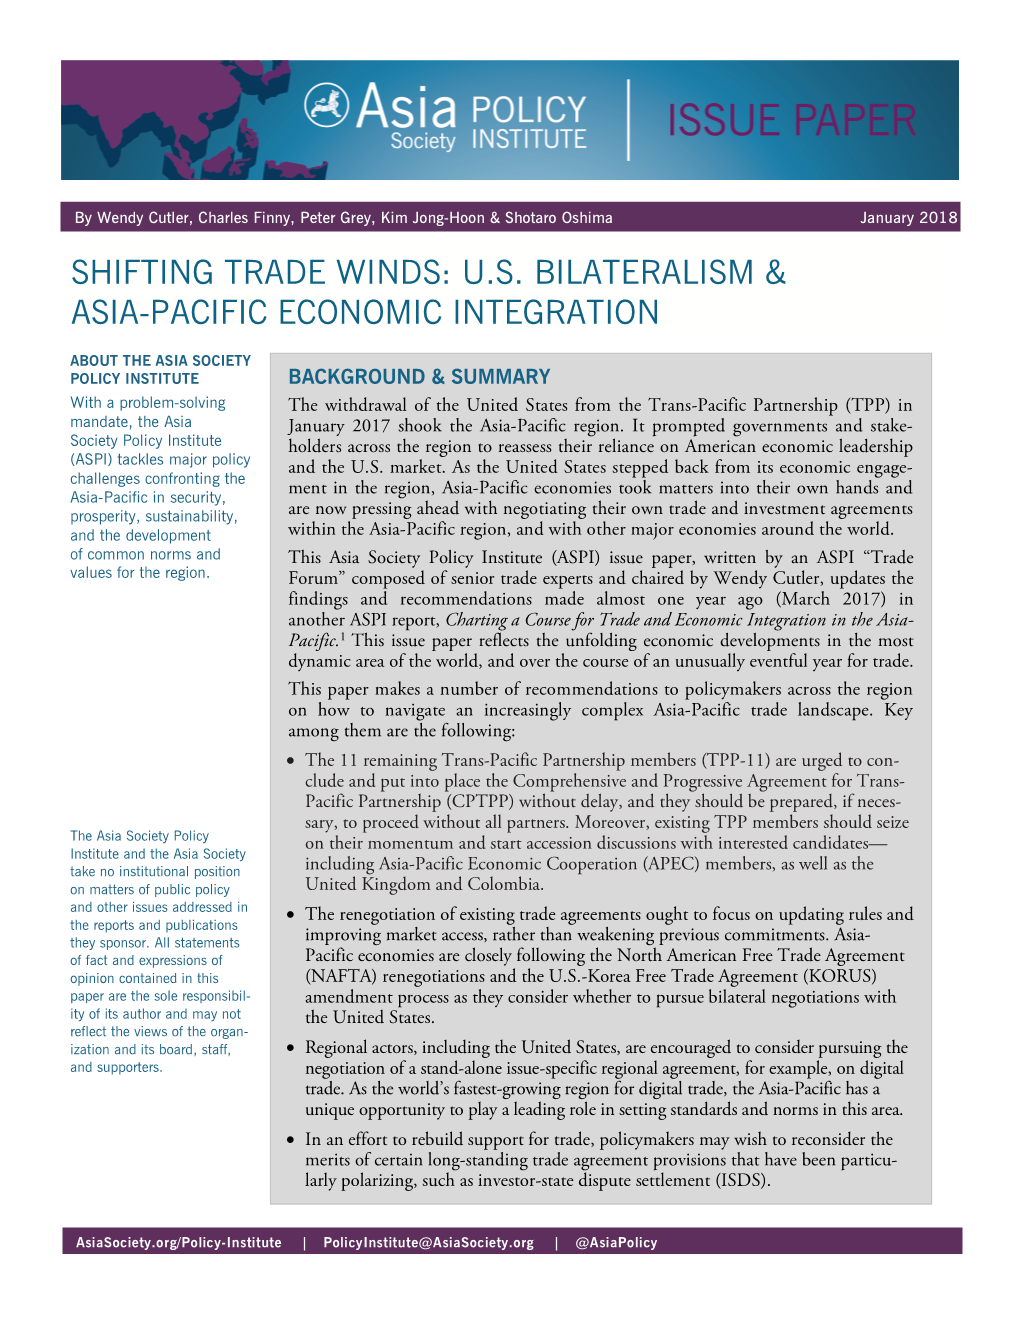 Shifting Trade Winds: US Bilateralism & Asia-Pacific